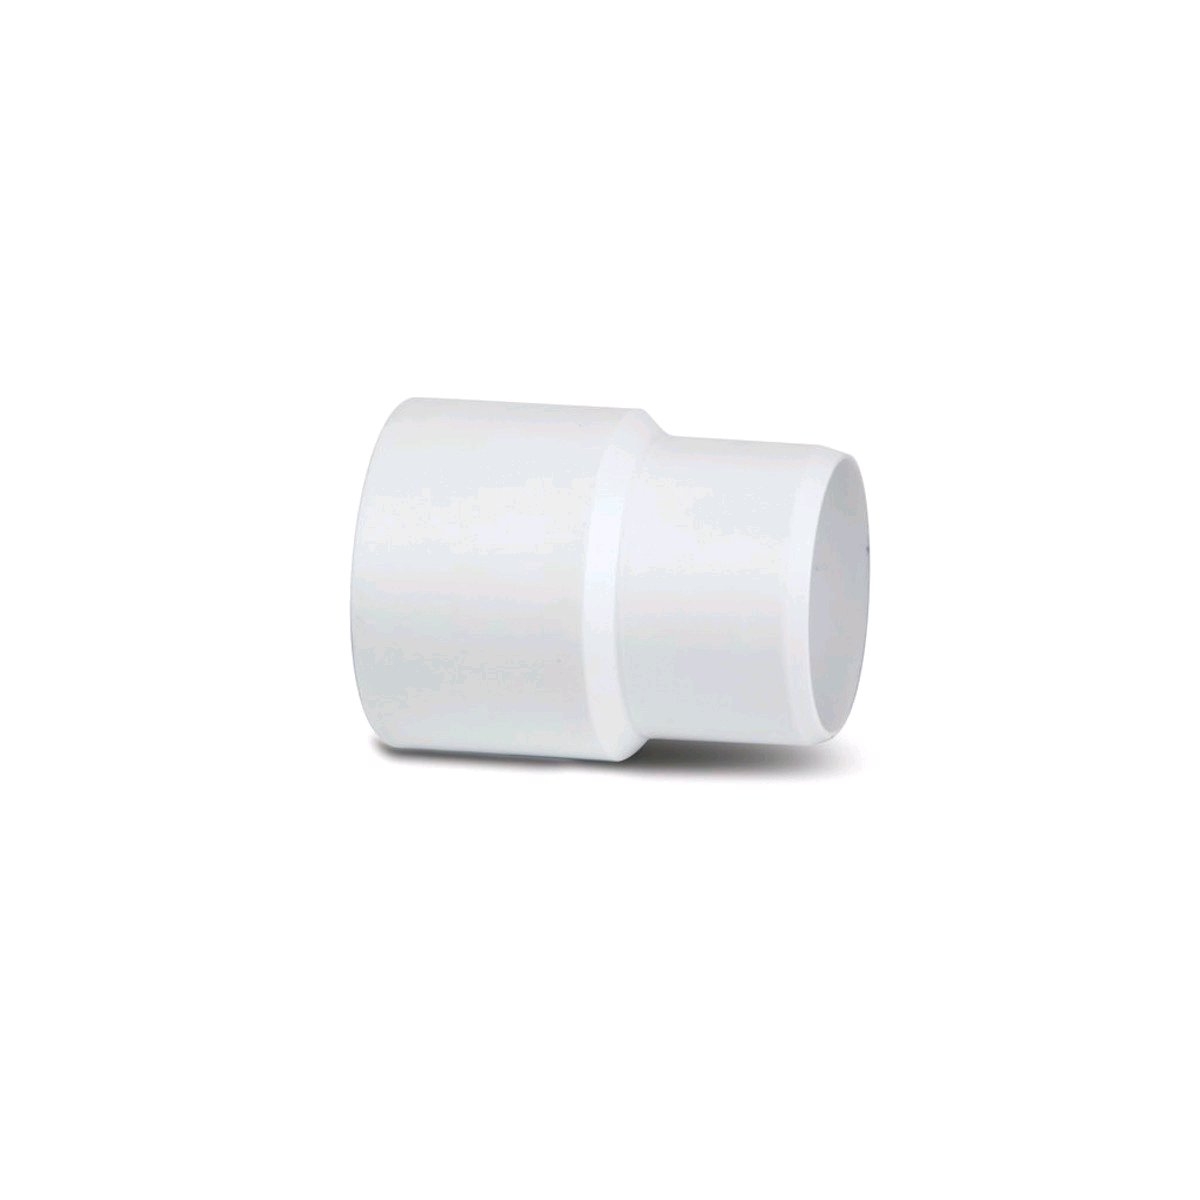 Polypipe 32mm Solvent Weld Adaptor for Waterless Valve 